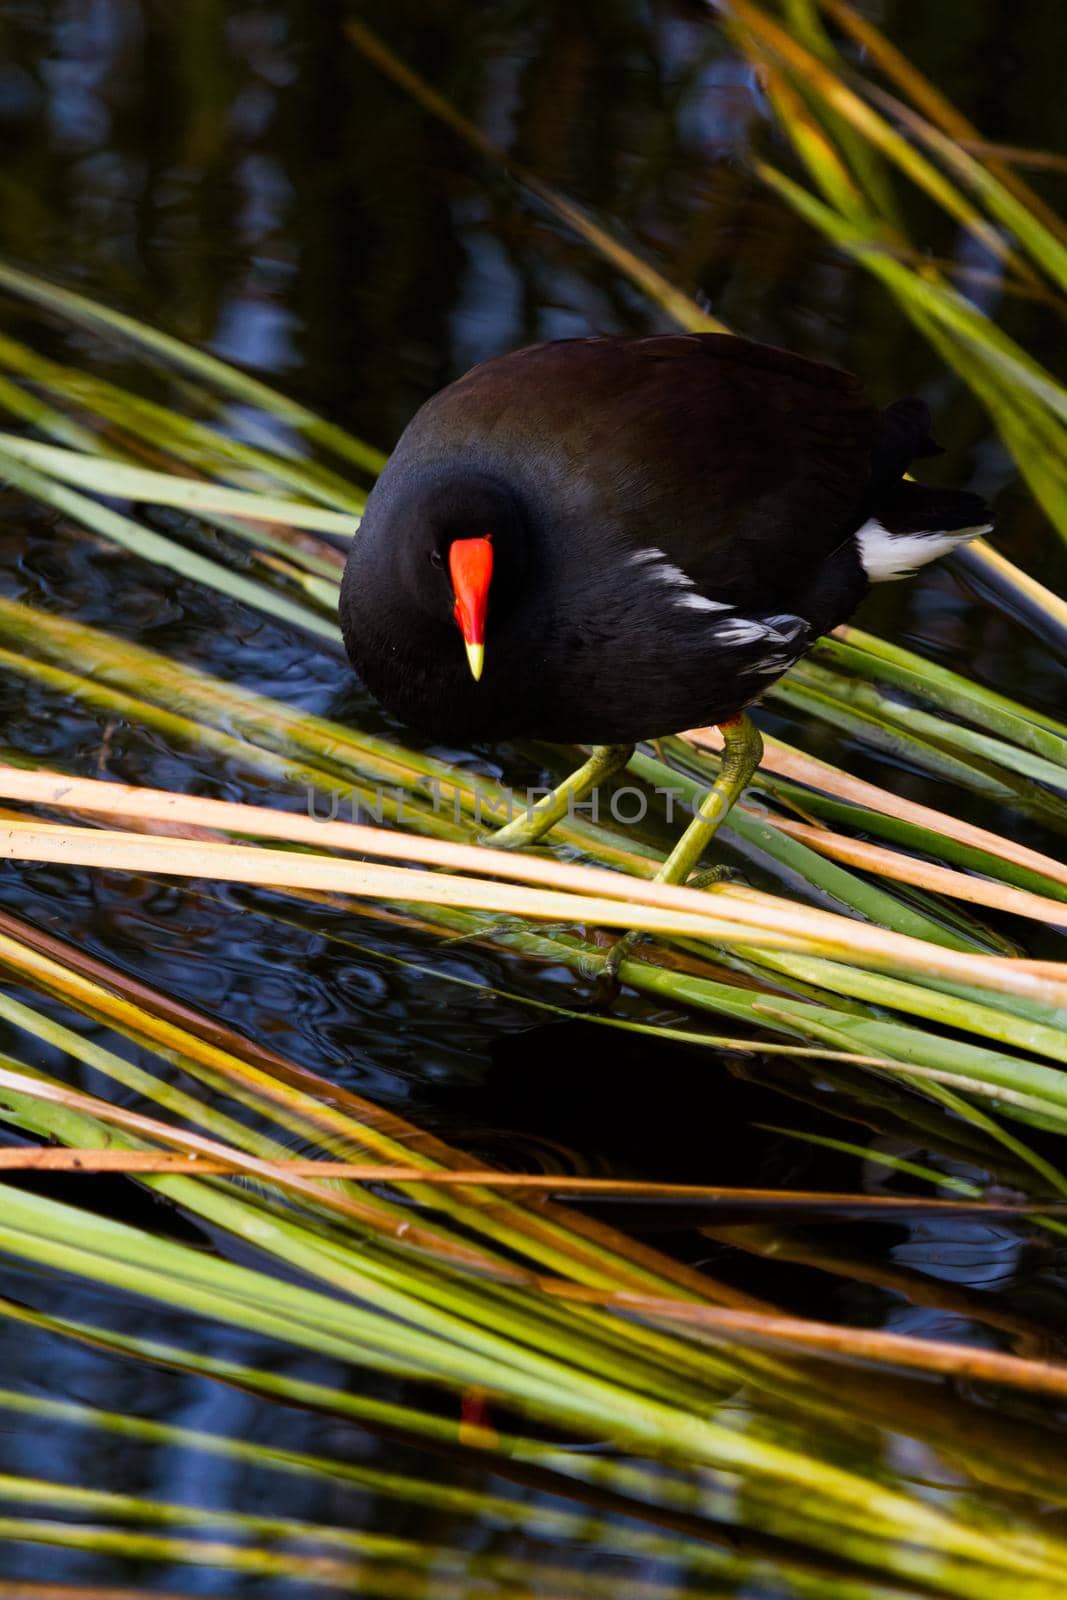 Common moorhen in natural habitat on South Padre Island, TX.